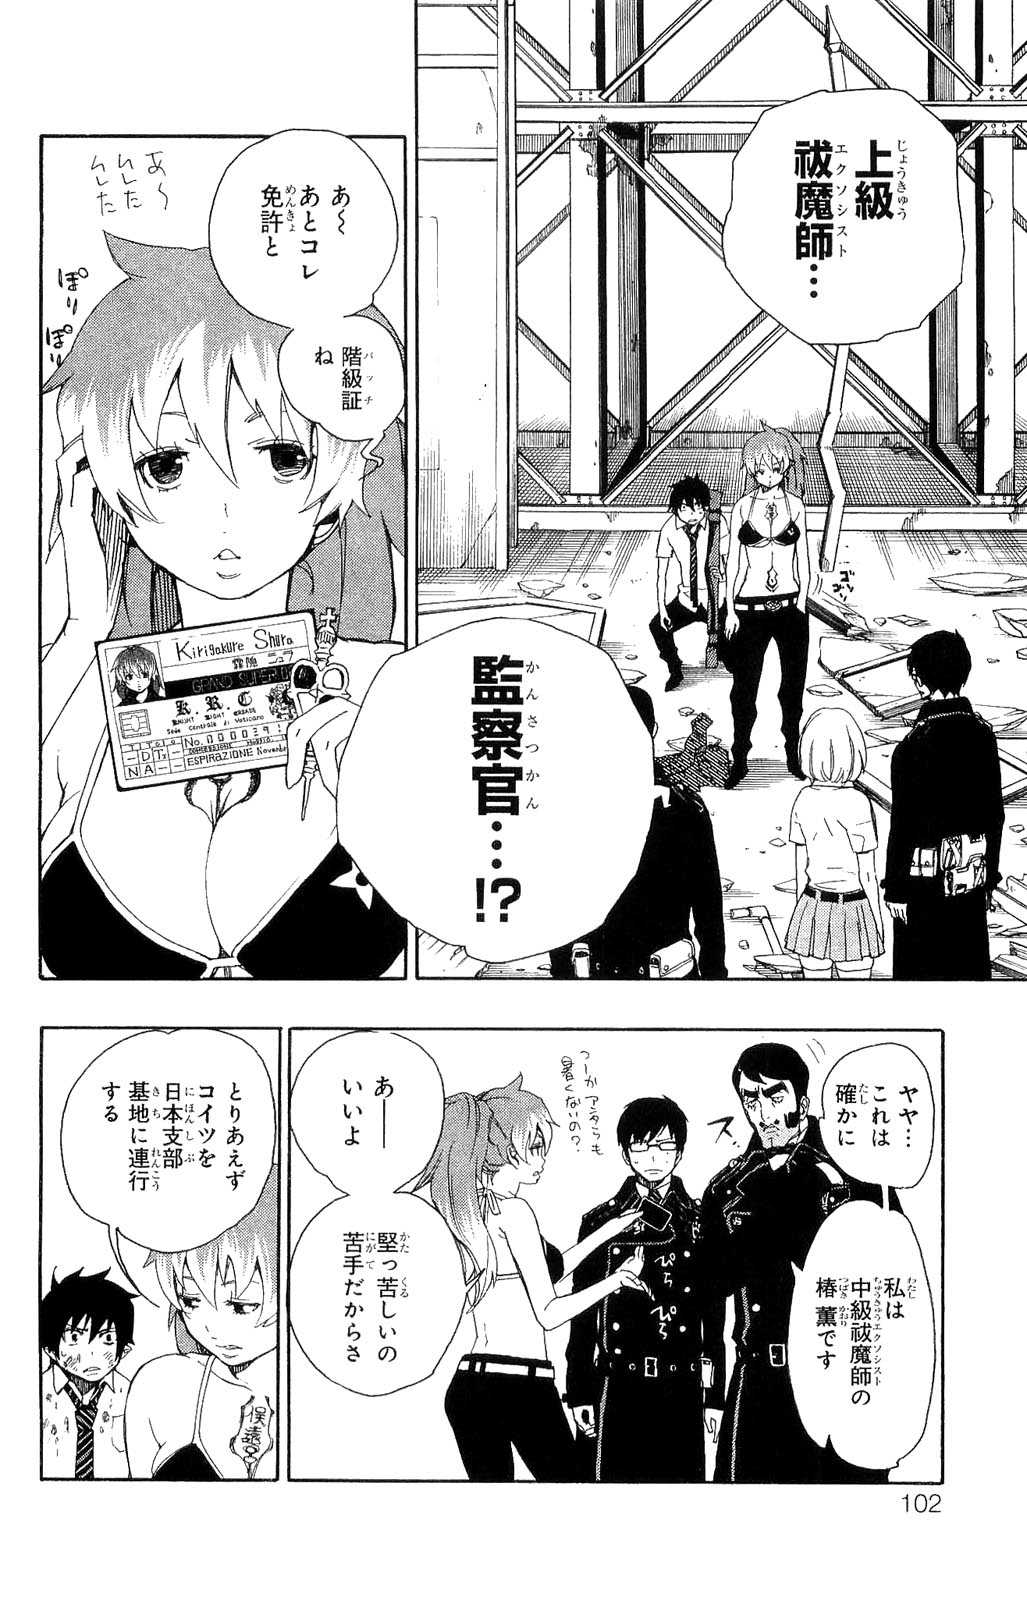 Ao no Exorcist - Chapter 10 - Page 2